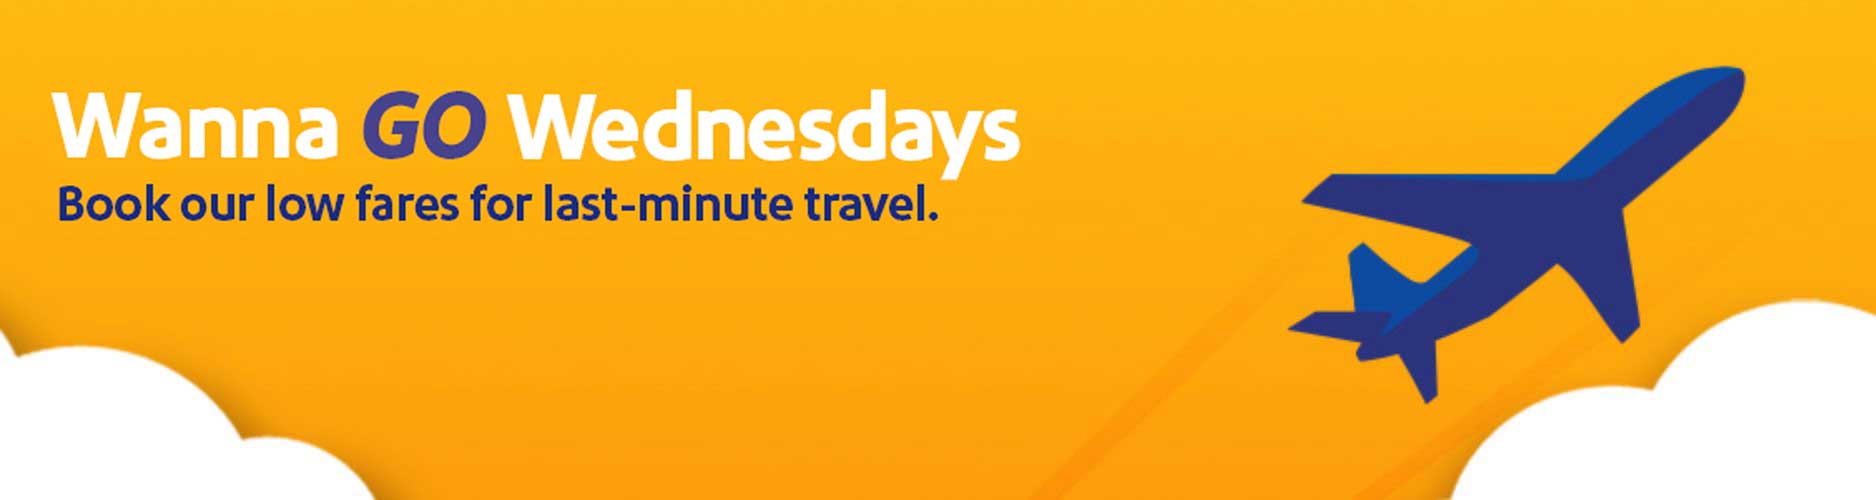 Wanna go Wednesday Book our low fares for last minute travel.